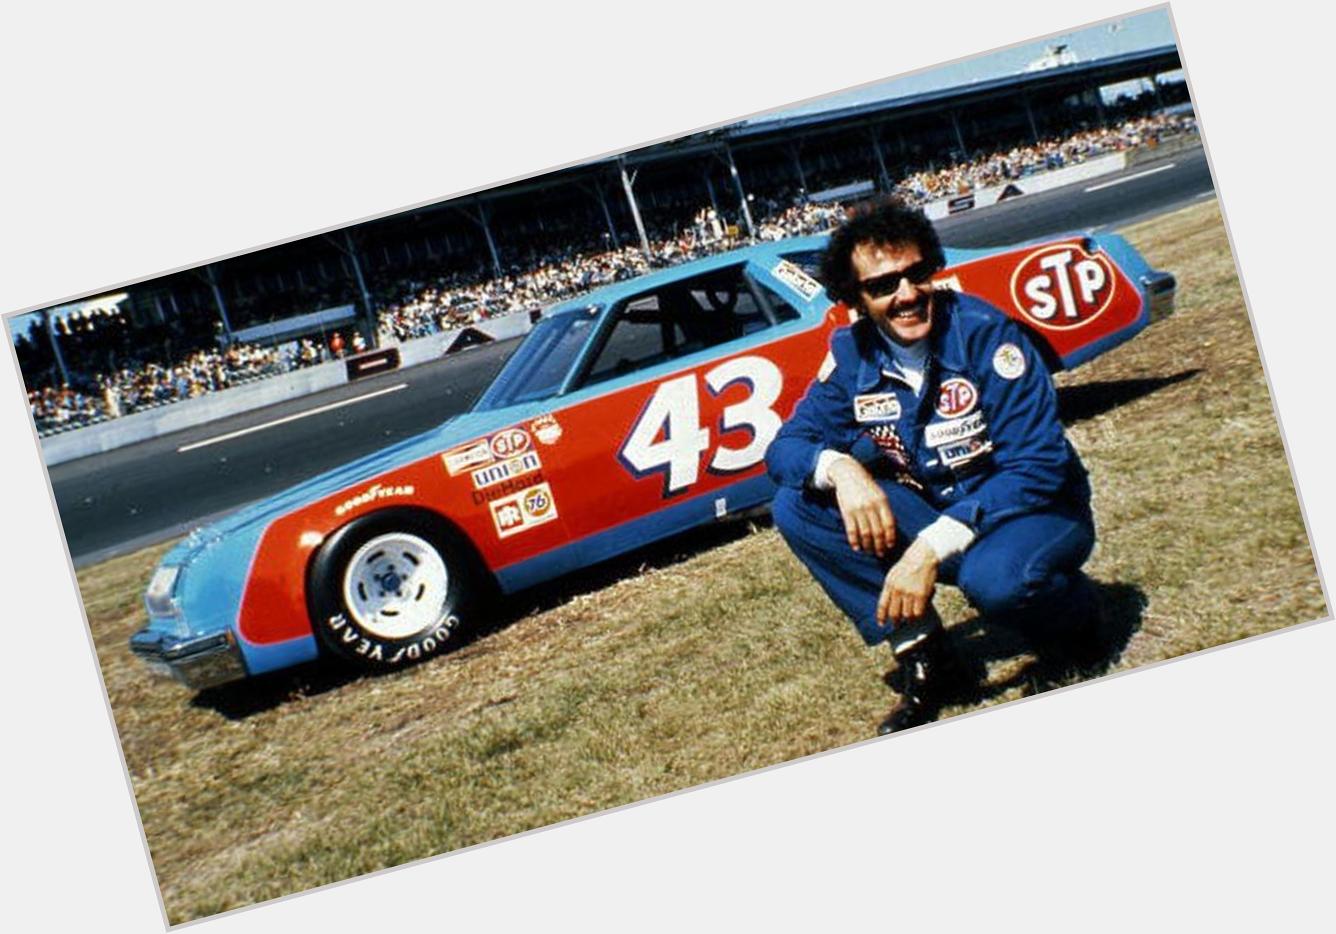 Happy 81st birthday to the The King, Richard Petty! (by u/Kevinm0388) 